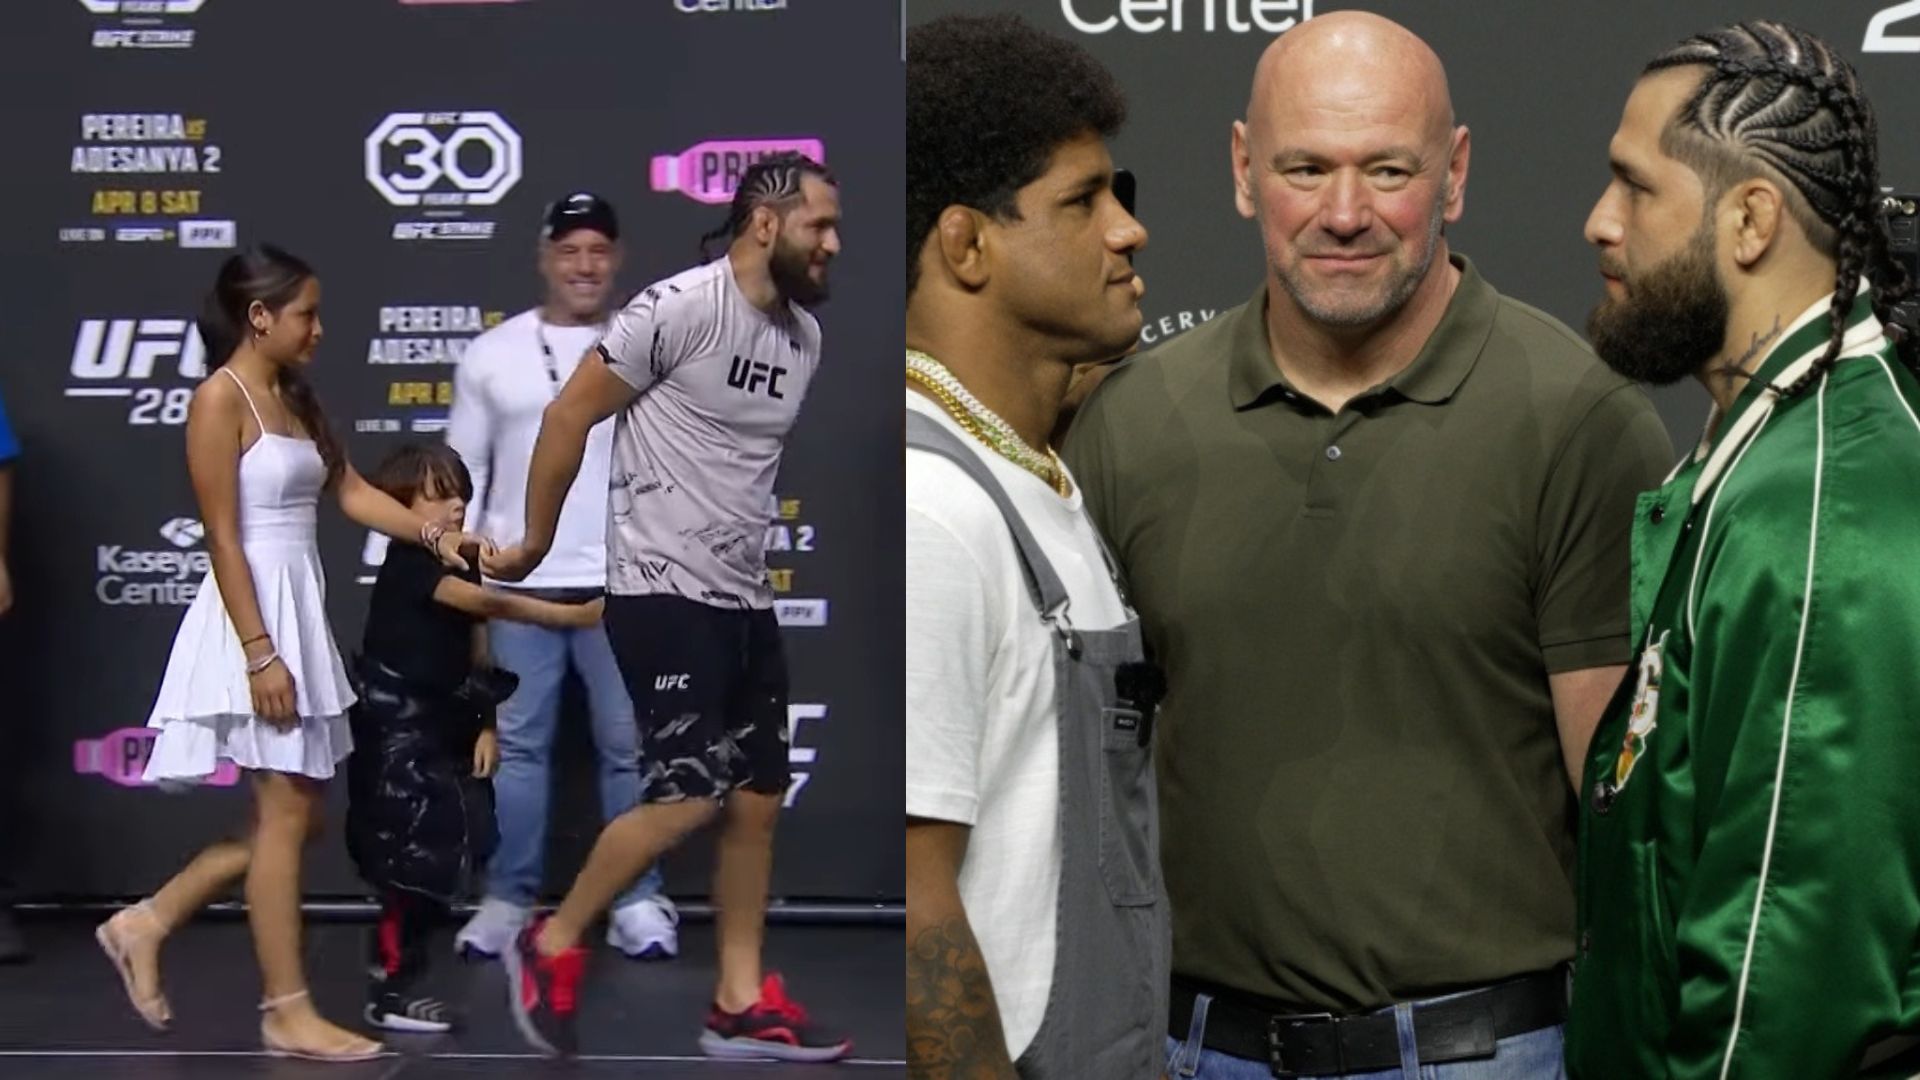 Jorge Masvidal brings his children to the weigh-ins